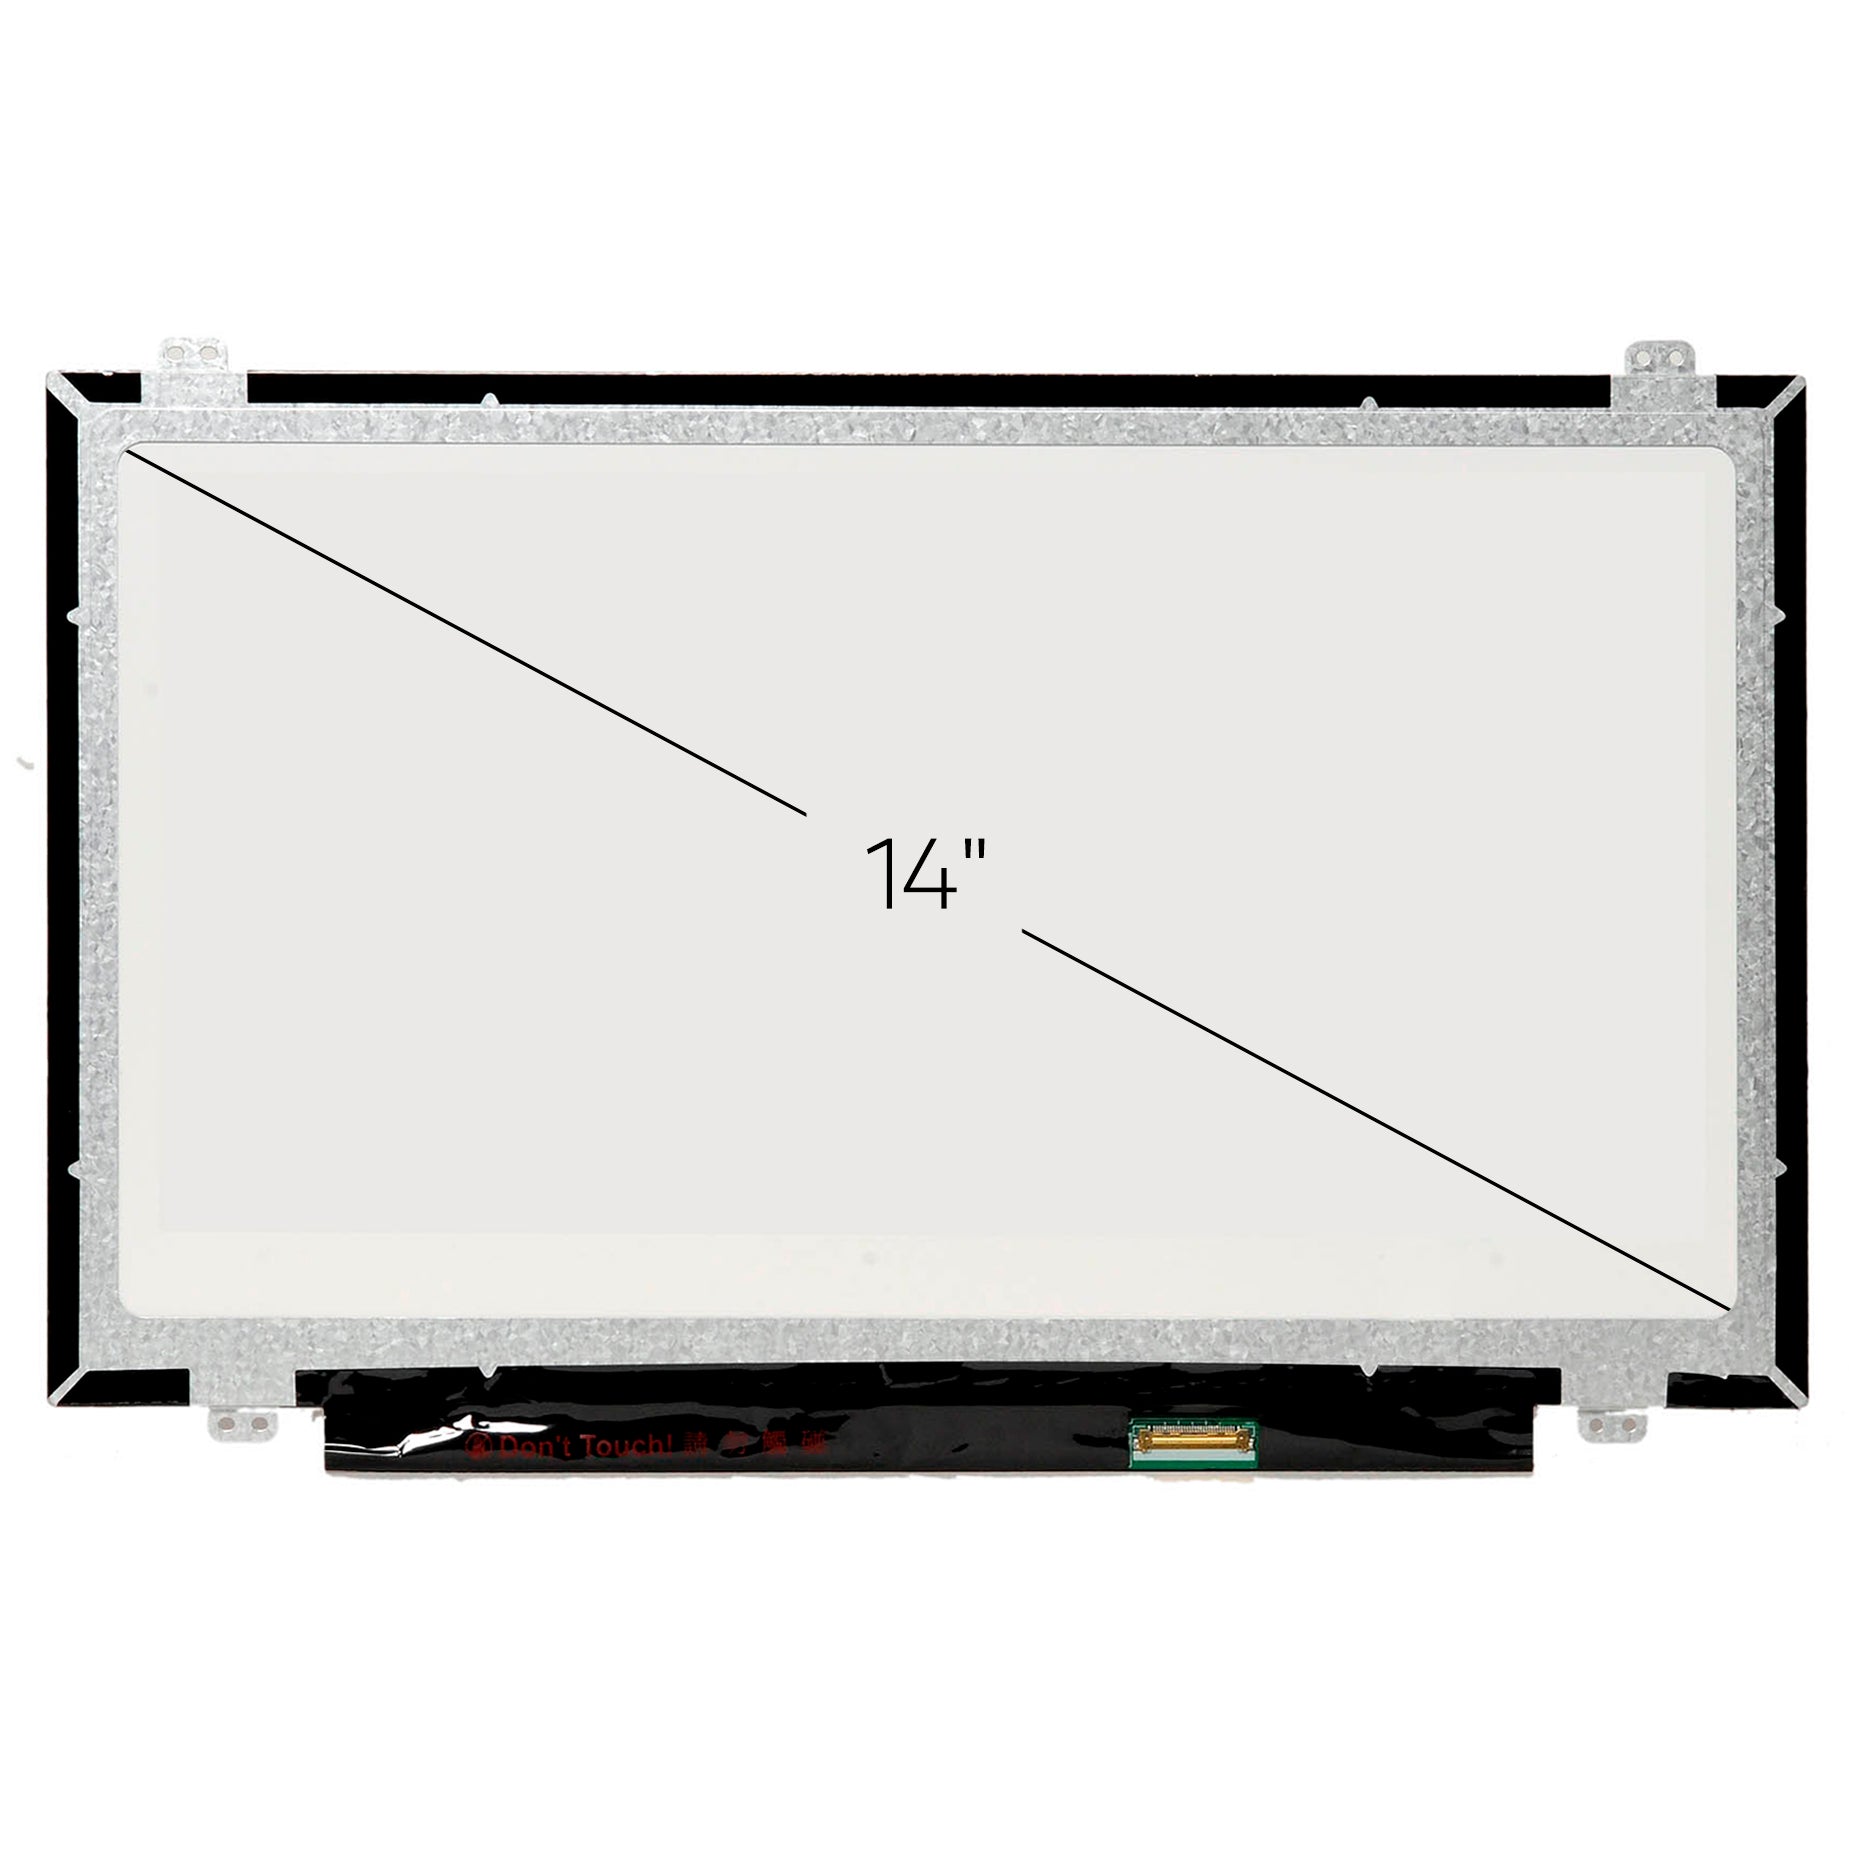 Screen Replacement for B140XTN02.E HD 1366x768 Glossy LCD LED Display